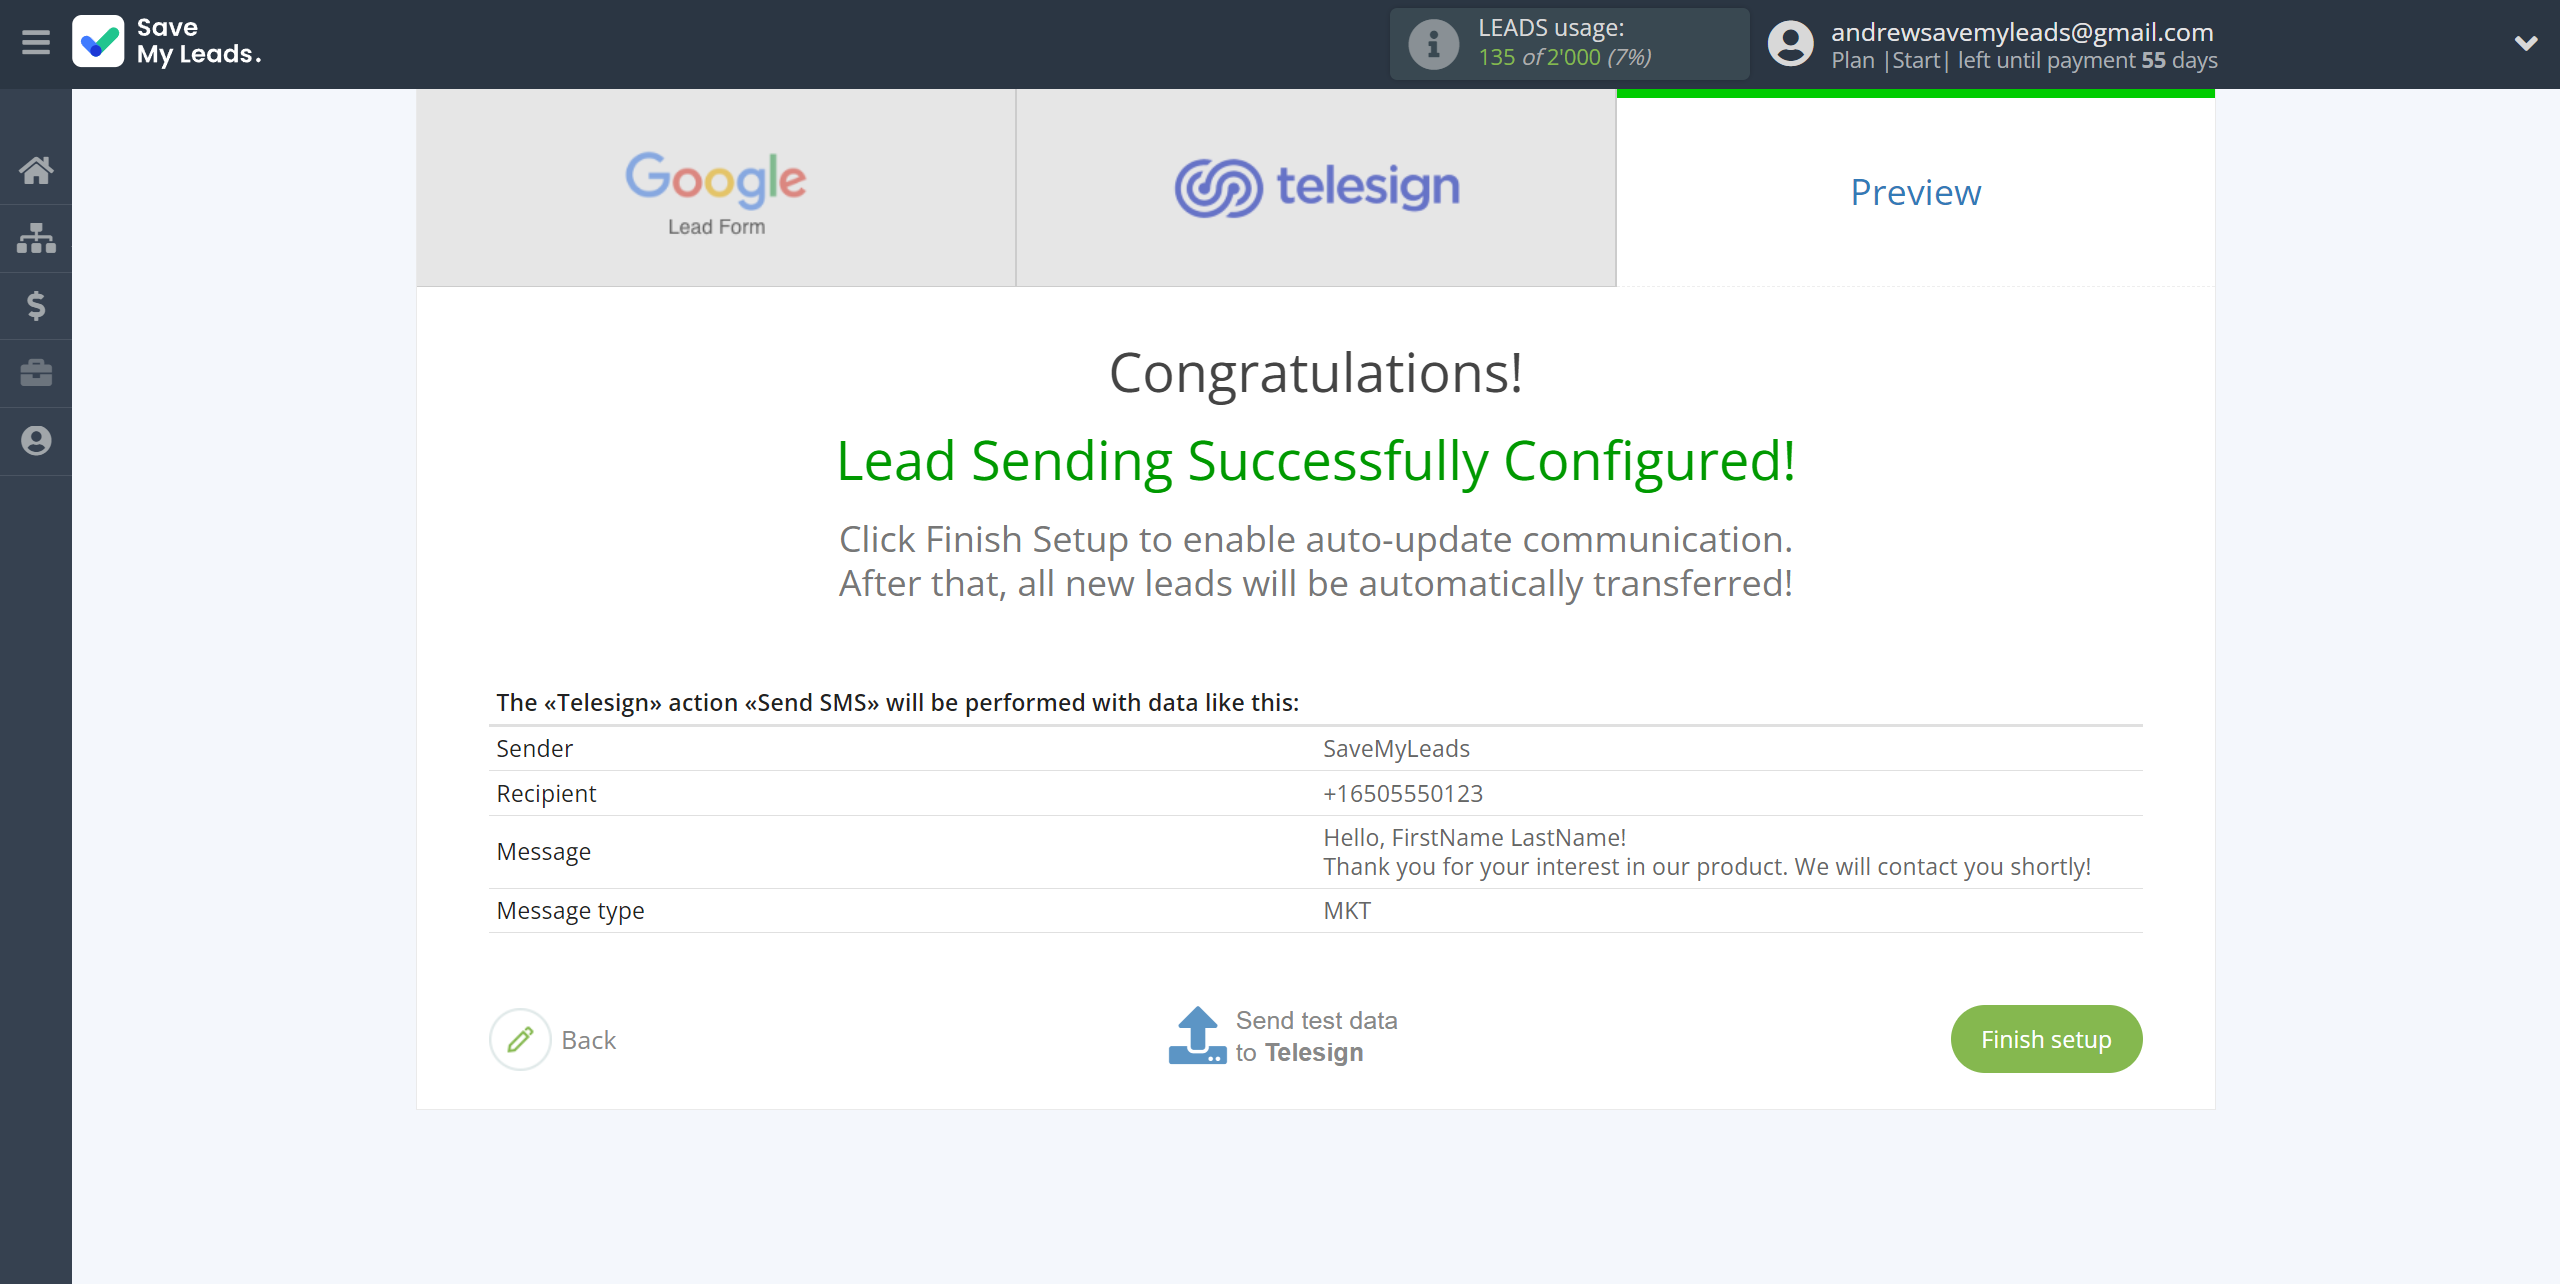 How to Connect Google Lead Form with Telesign | Test data